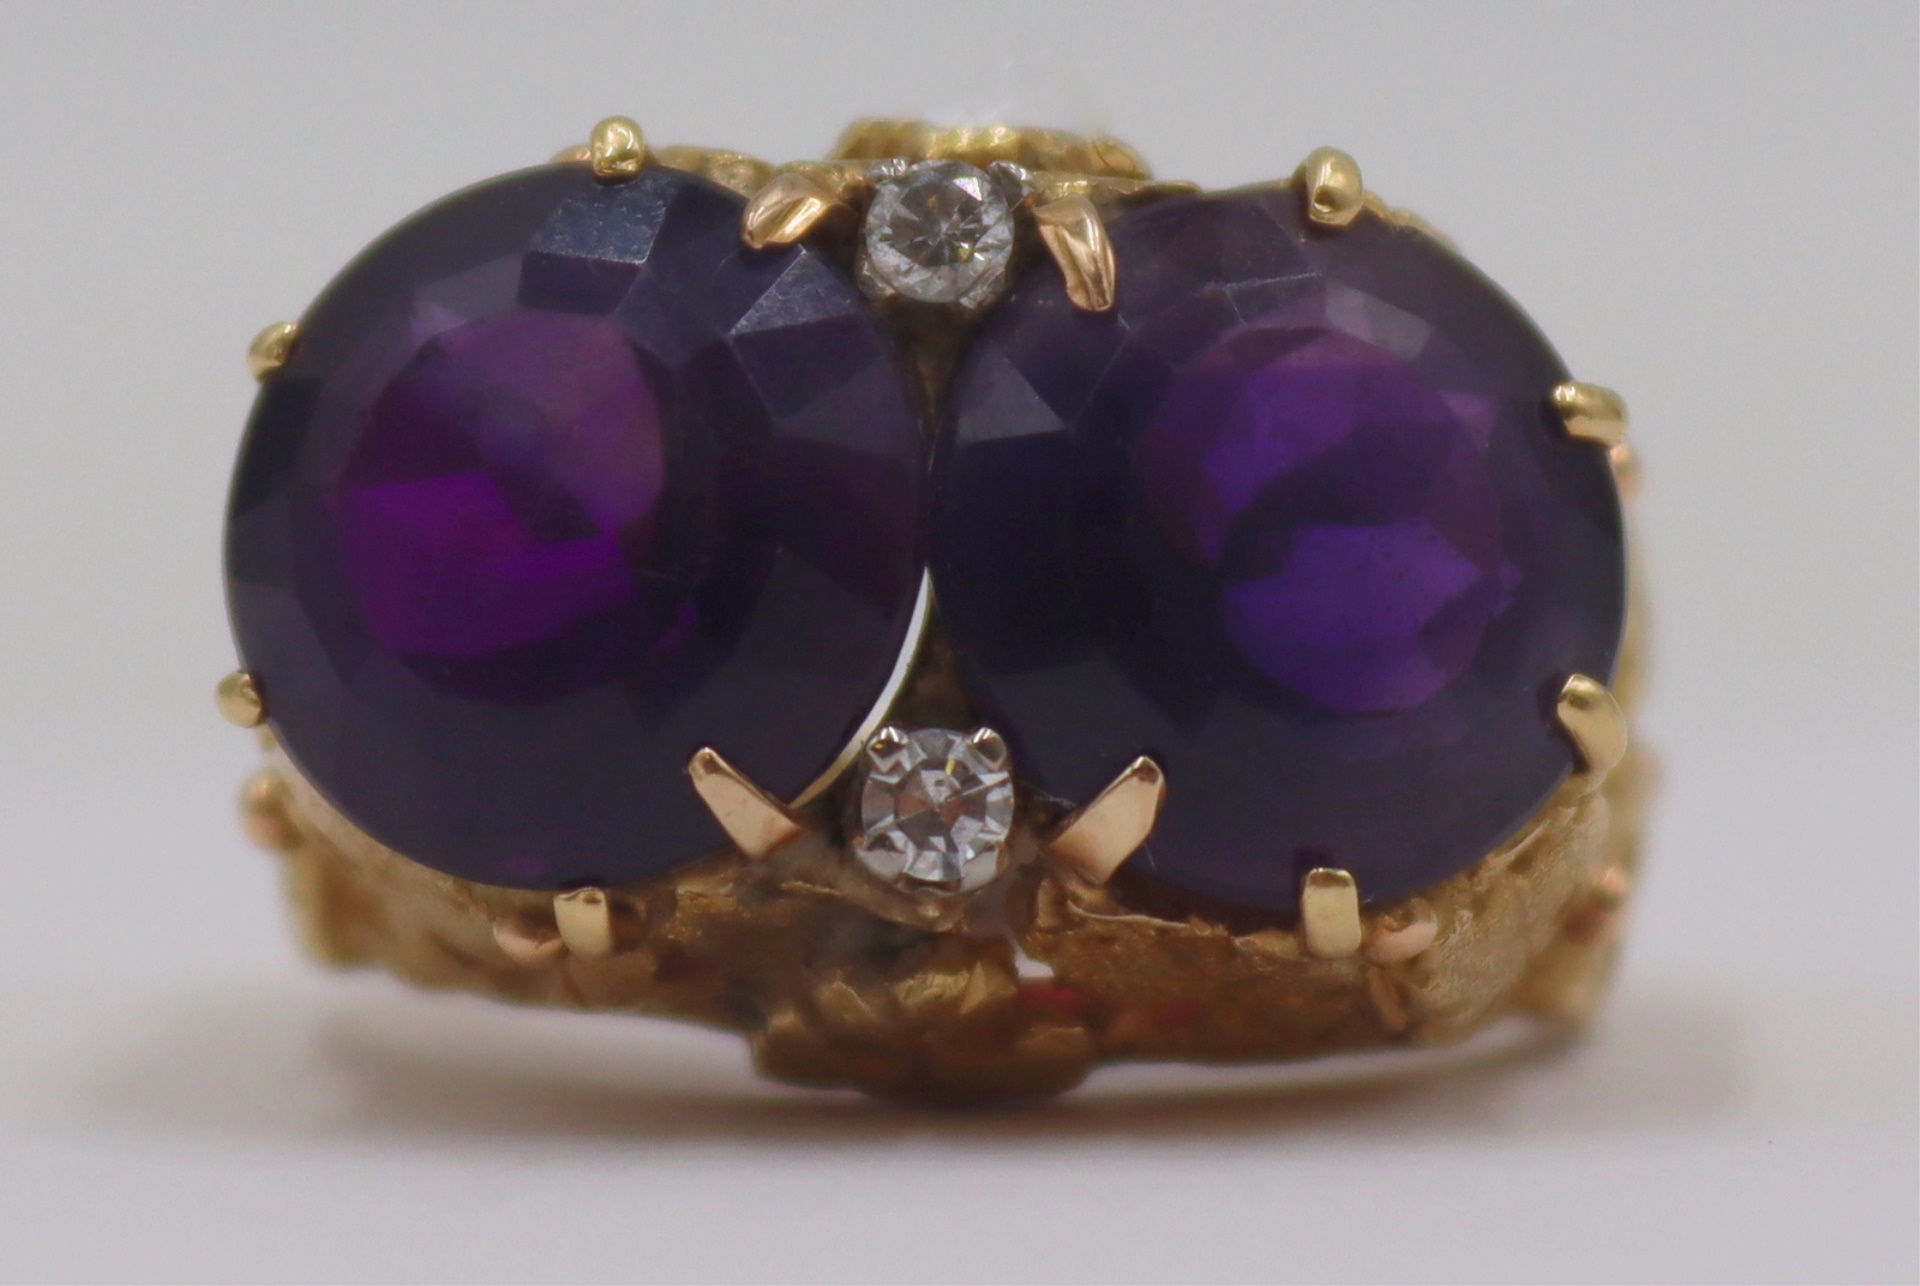 JEWELRY. 18KT GOLD, AMETHYST, AND